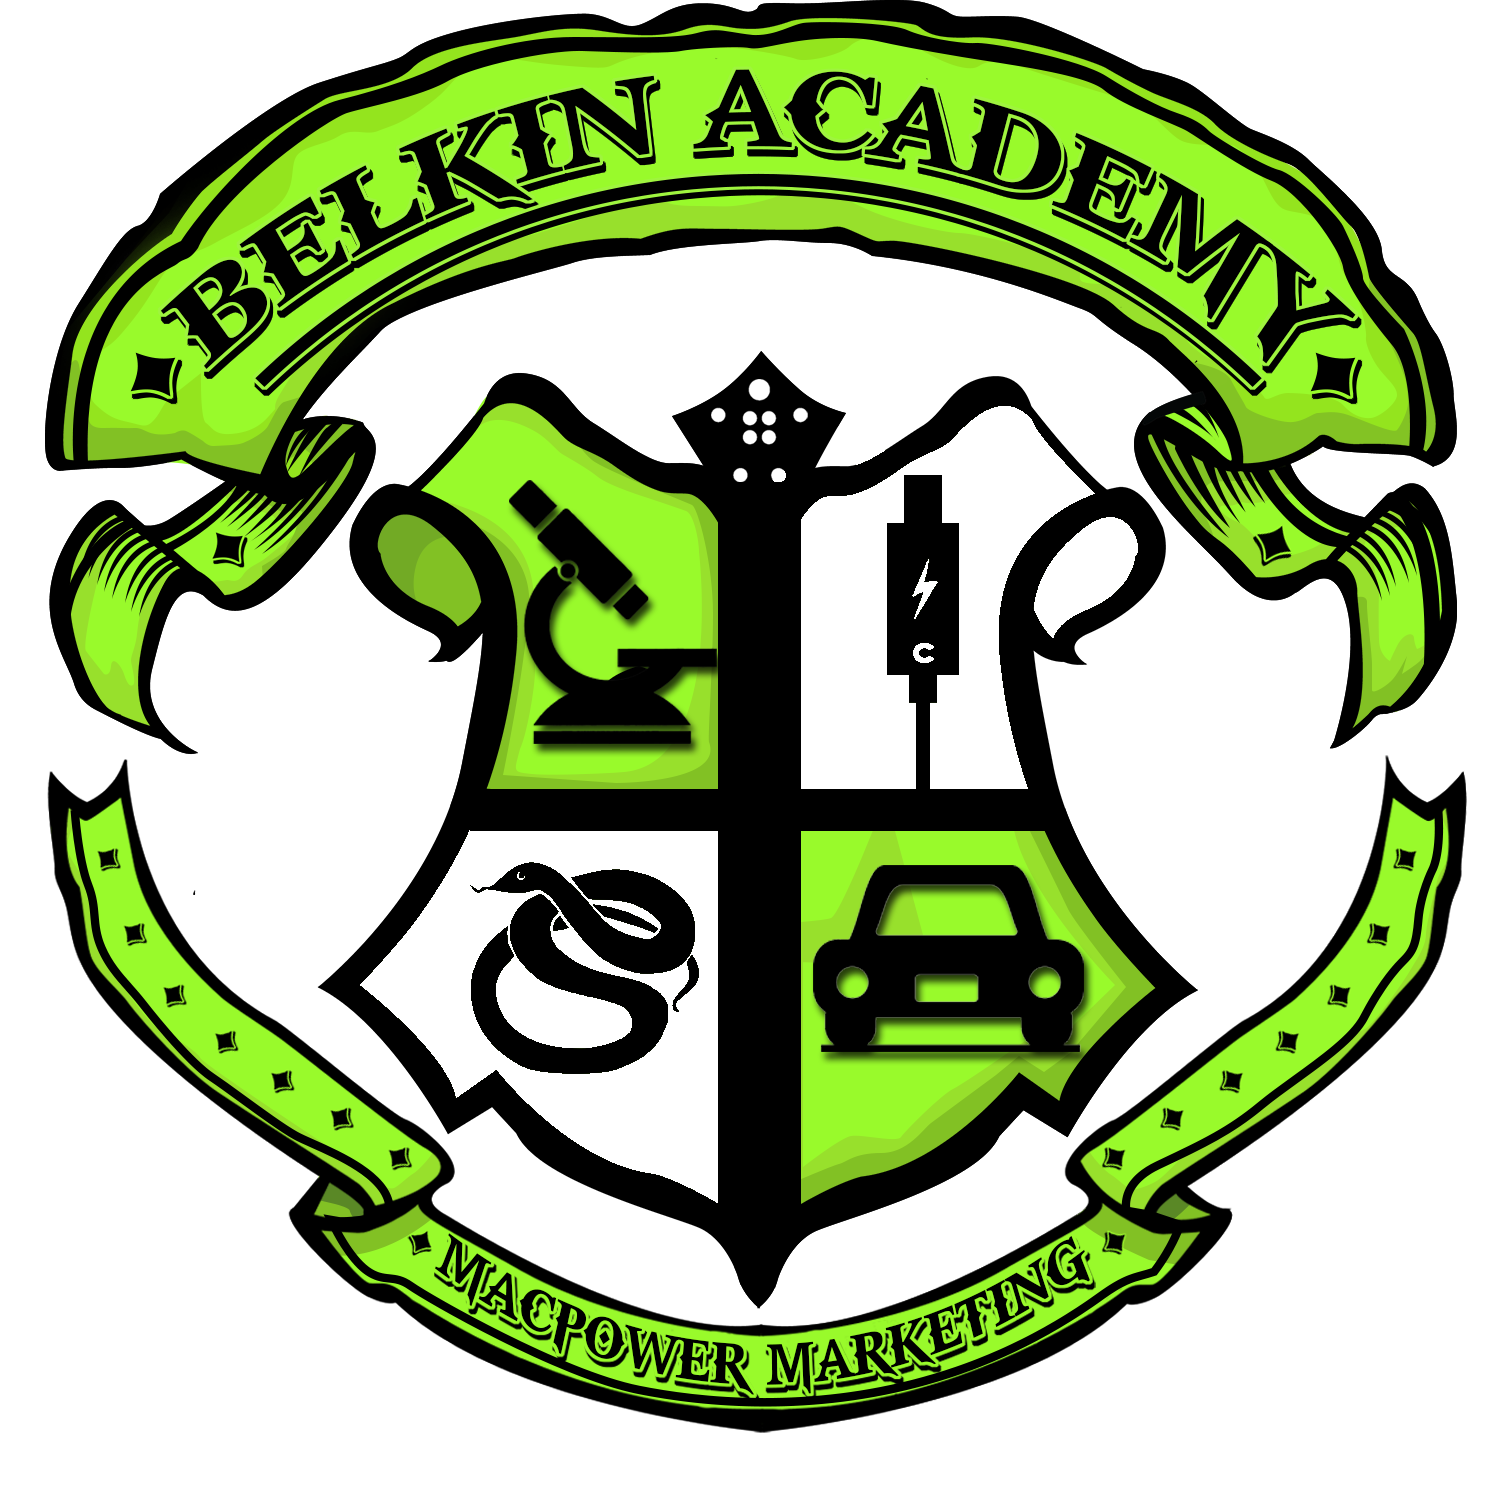 BELKIN LAUNCHES THE FIRST “BELKIN ACADEMY” IN THE PHILIPPINES